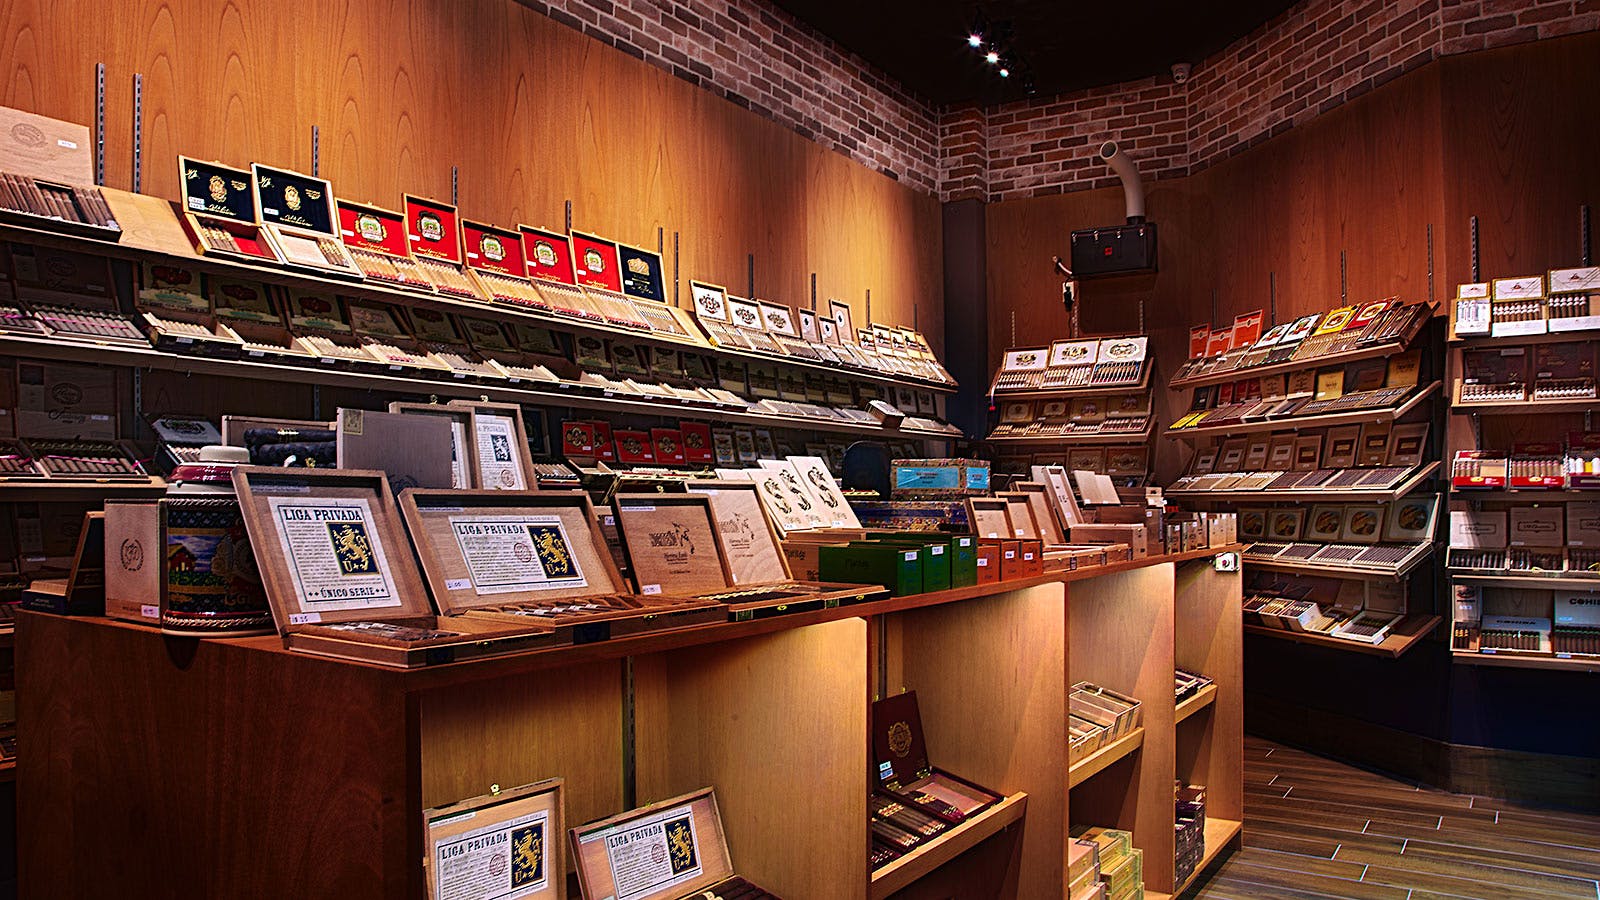 The cigar choices in a well-stocked retail humidor can be overwhelming. A little bit of knowledge about the blend and strength can go a long way.